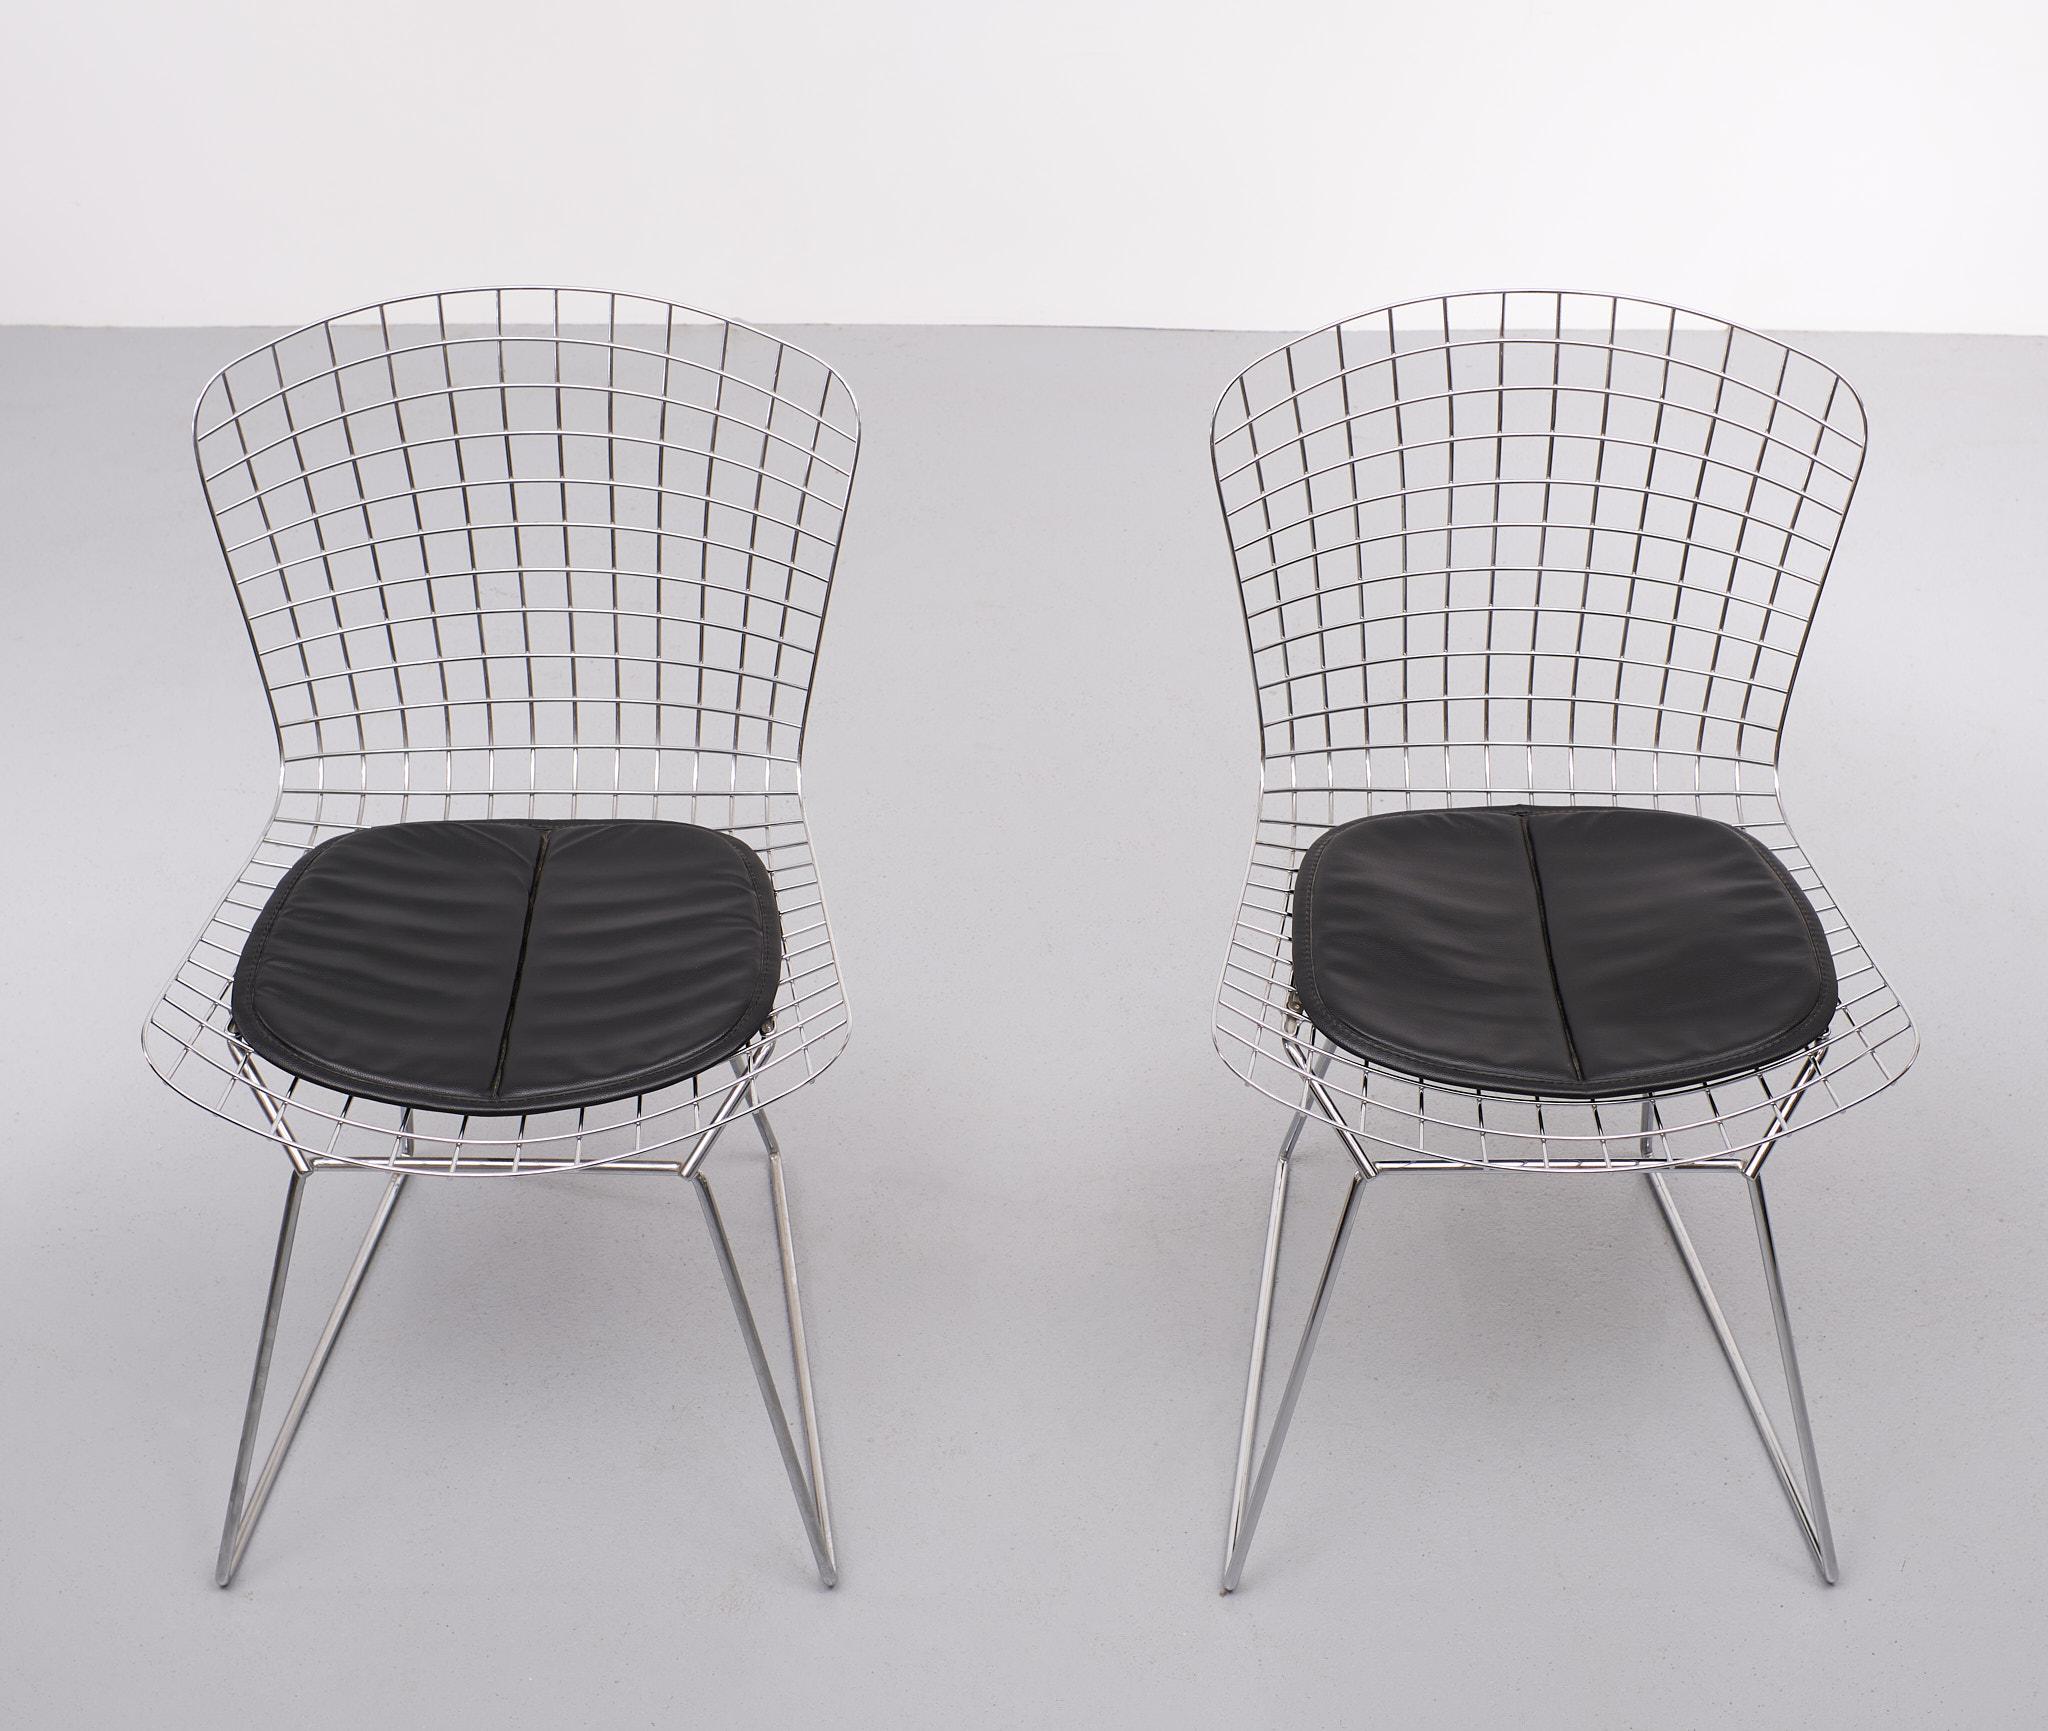 Iconic Harry Bertoia  side chair . Chrome wire chairs .with there slabs ,in 
Black limitation leather. Very good condition . 